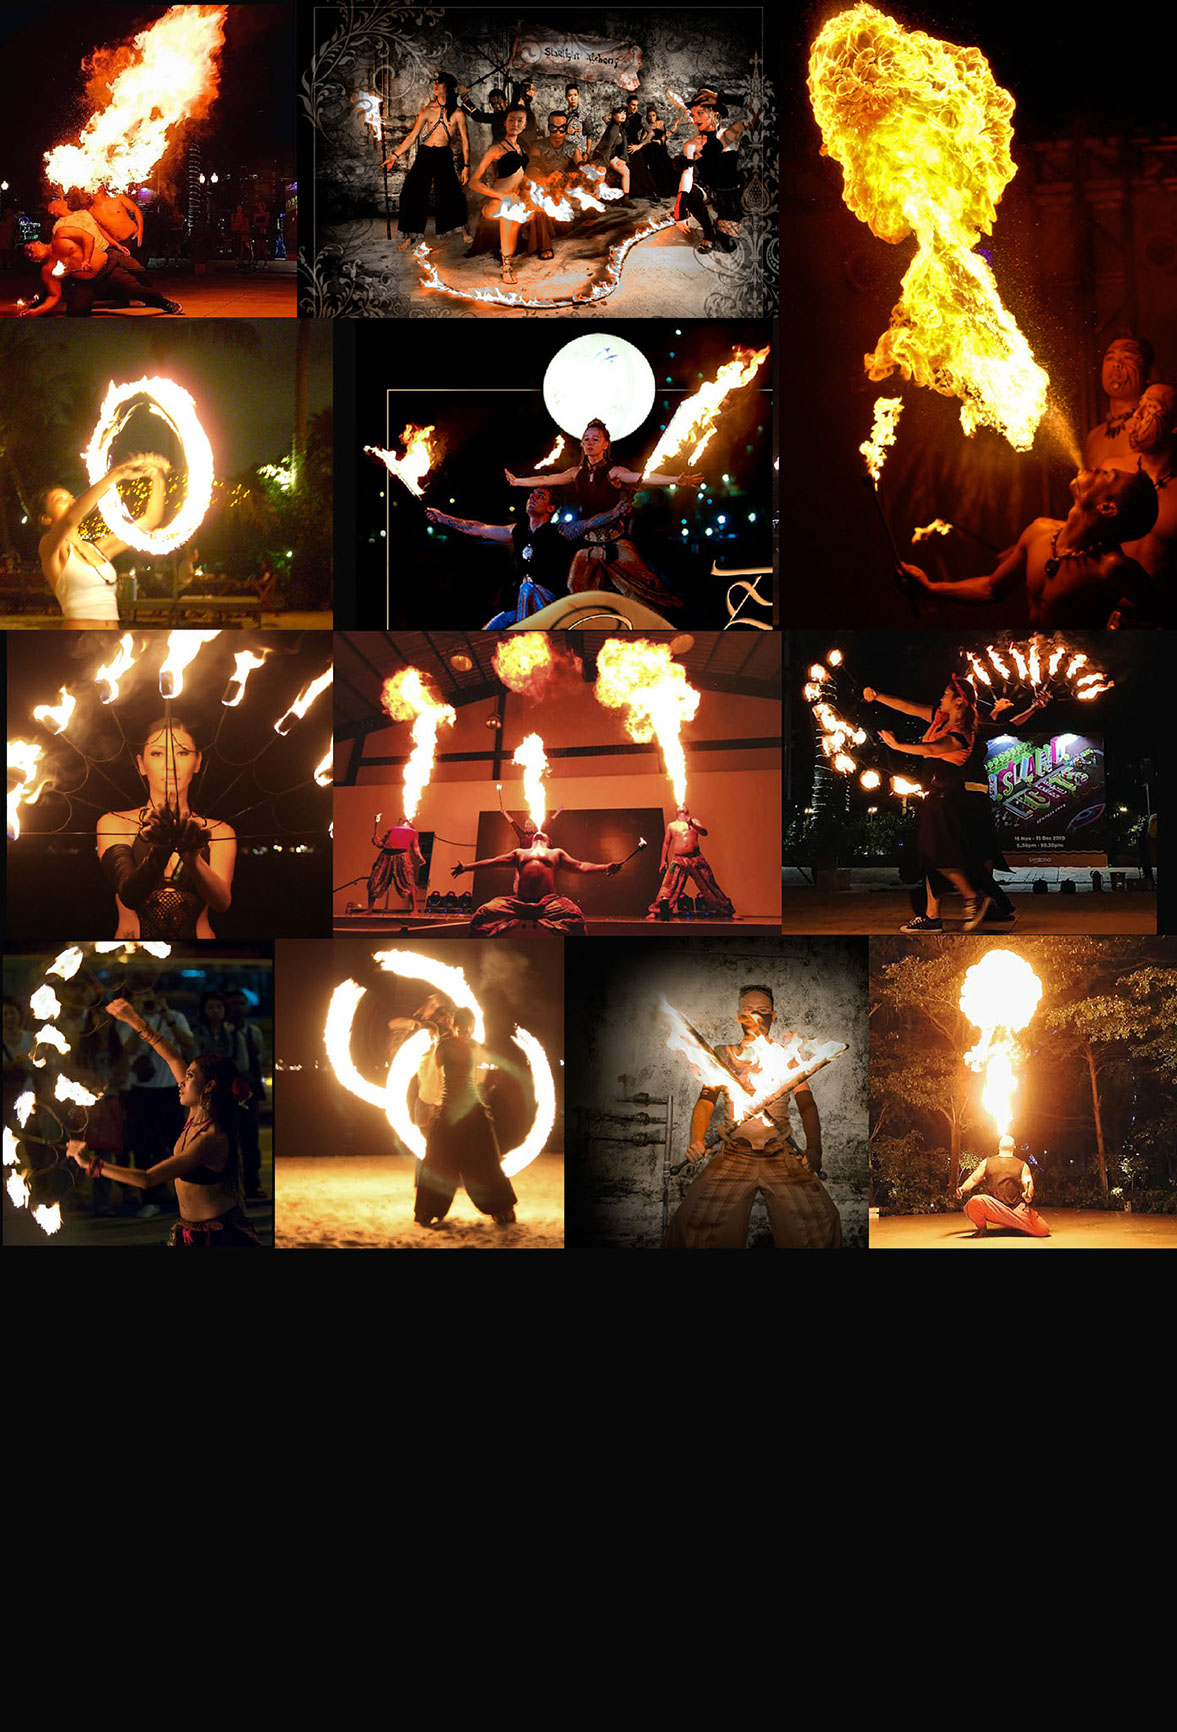 Fire Artist for hire Singapore, Fire eating and Breathing Singapore for hire, Fire Spinners for hire Singapore, Roving Entertainment for hire, B